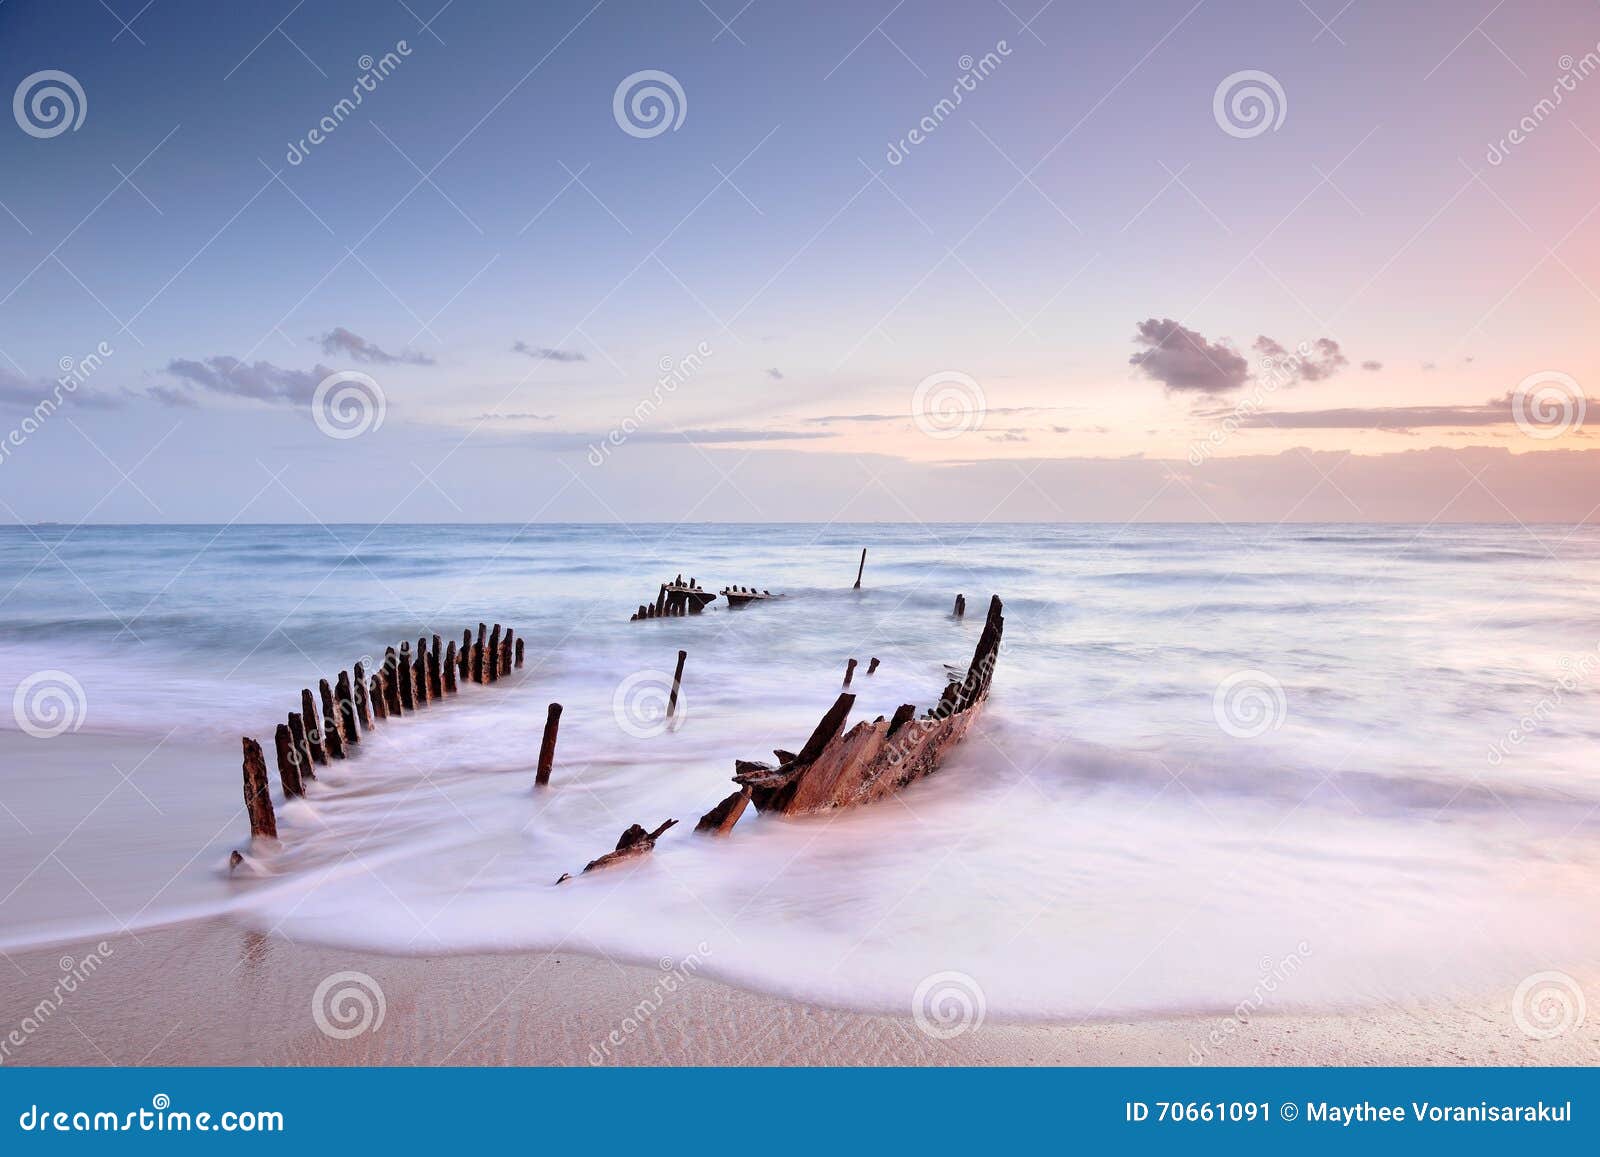 dicky wreck at sunrise